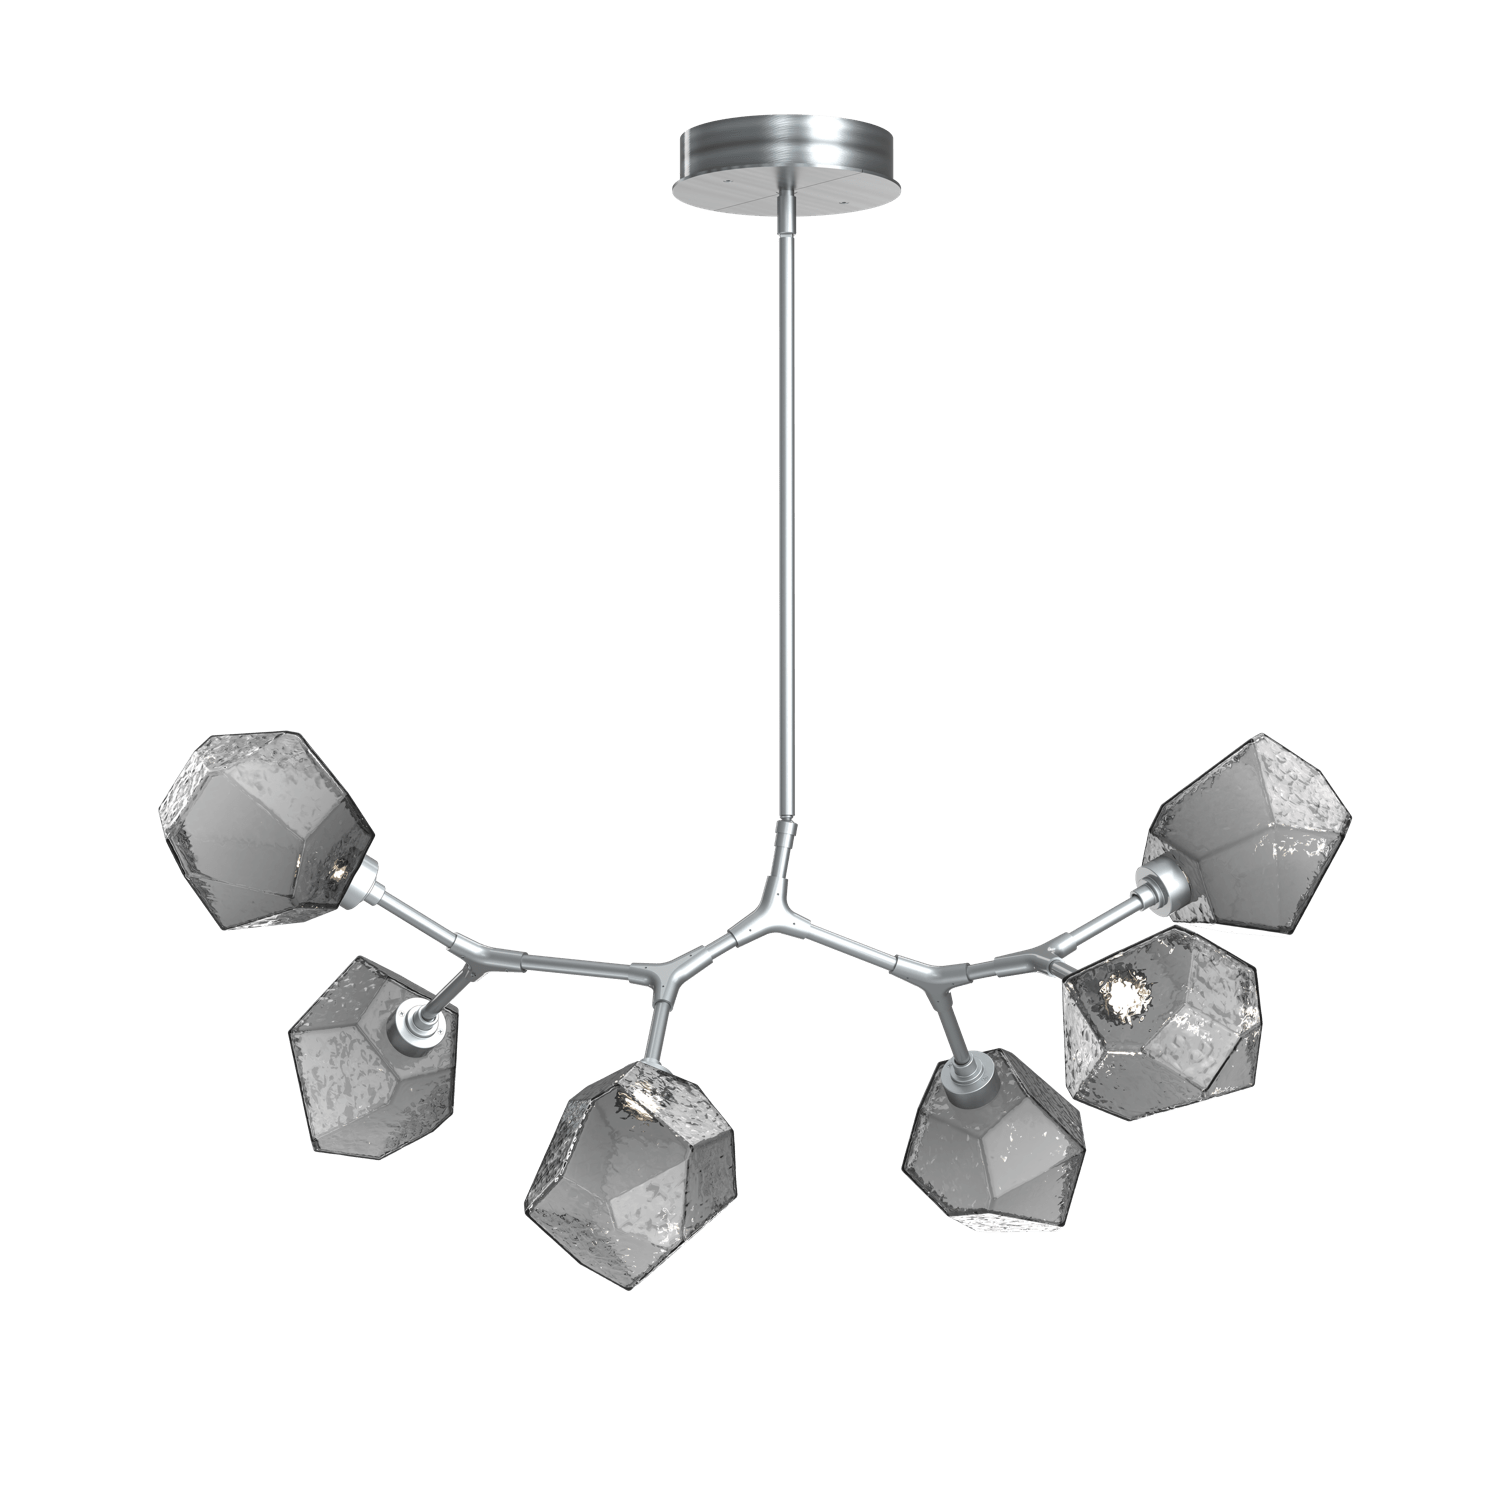 PLB0039-BA-SN-S-Hammerton-Studio-Gem-6-light-modern-branch-chandelier-with-satin-nickel-finish-and-smoke-blown-glass-shades-and-LED-lamping